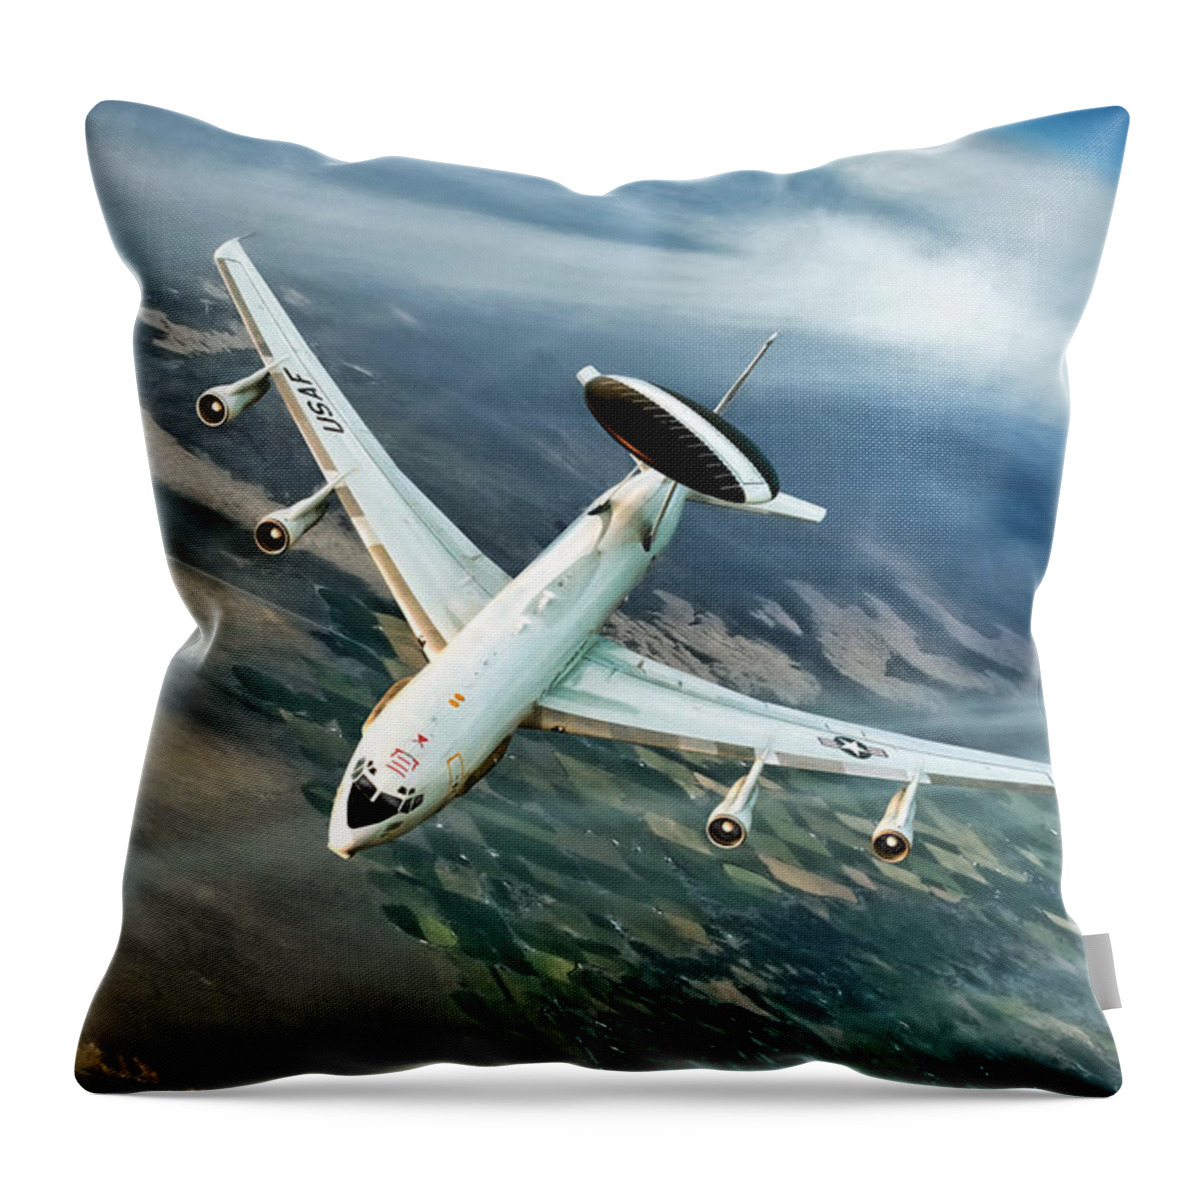 Aviation Throw Pillow featuring the digital art Eye In The Sky by Peter Chilelli